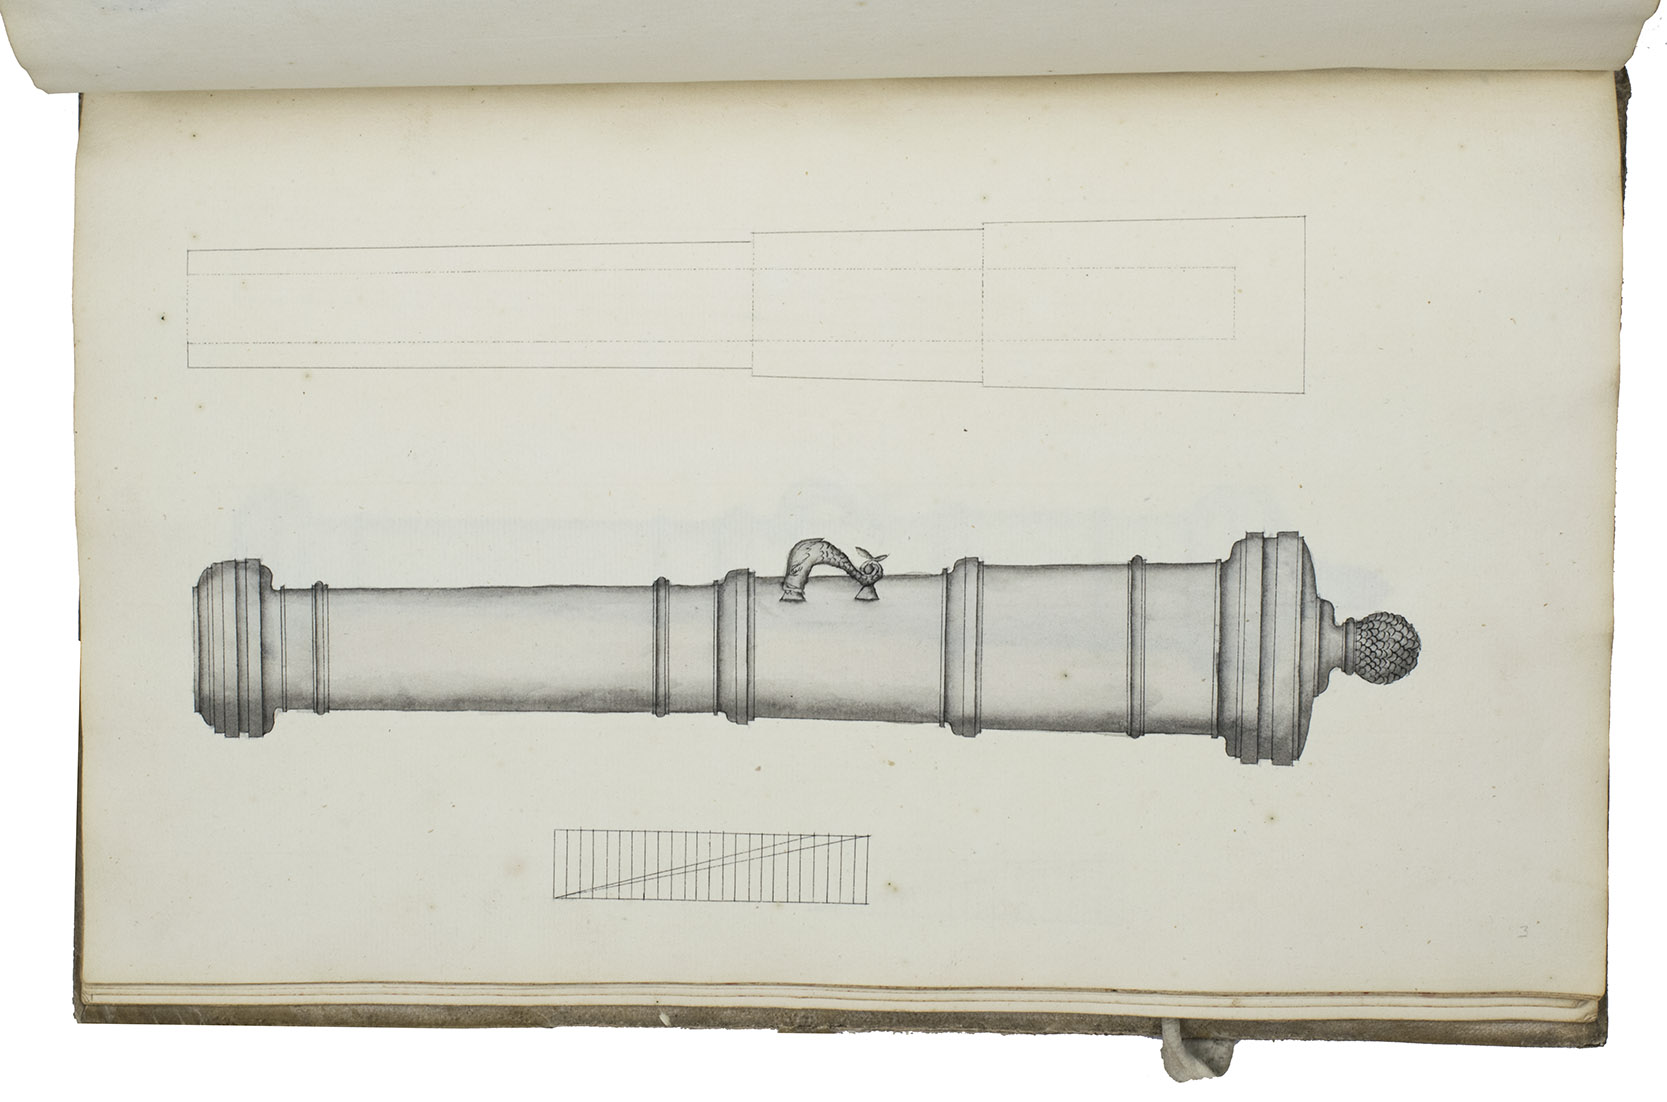 [MILITARY]. - Geometria of meetkonst ... Vestingbou of fortificatie ... [Artillerie]. [Netherlands, ca. 1750]. 3 related works in 1 volume. Folio. With numerous mathematical diagrams, fortification plans and measured drawings of artillery and ammunition, including 12 full-page watercolour drawings (3 fortification plans and 9 beautifully rendered canons) and many more watercolour drawings in the text. With a large folding fortification plan tipped in, a large folding artillery drawing loosely inserted, and several smaller drawings tipped in or loosely inserted. Contemporary sheepskin parchment.